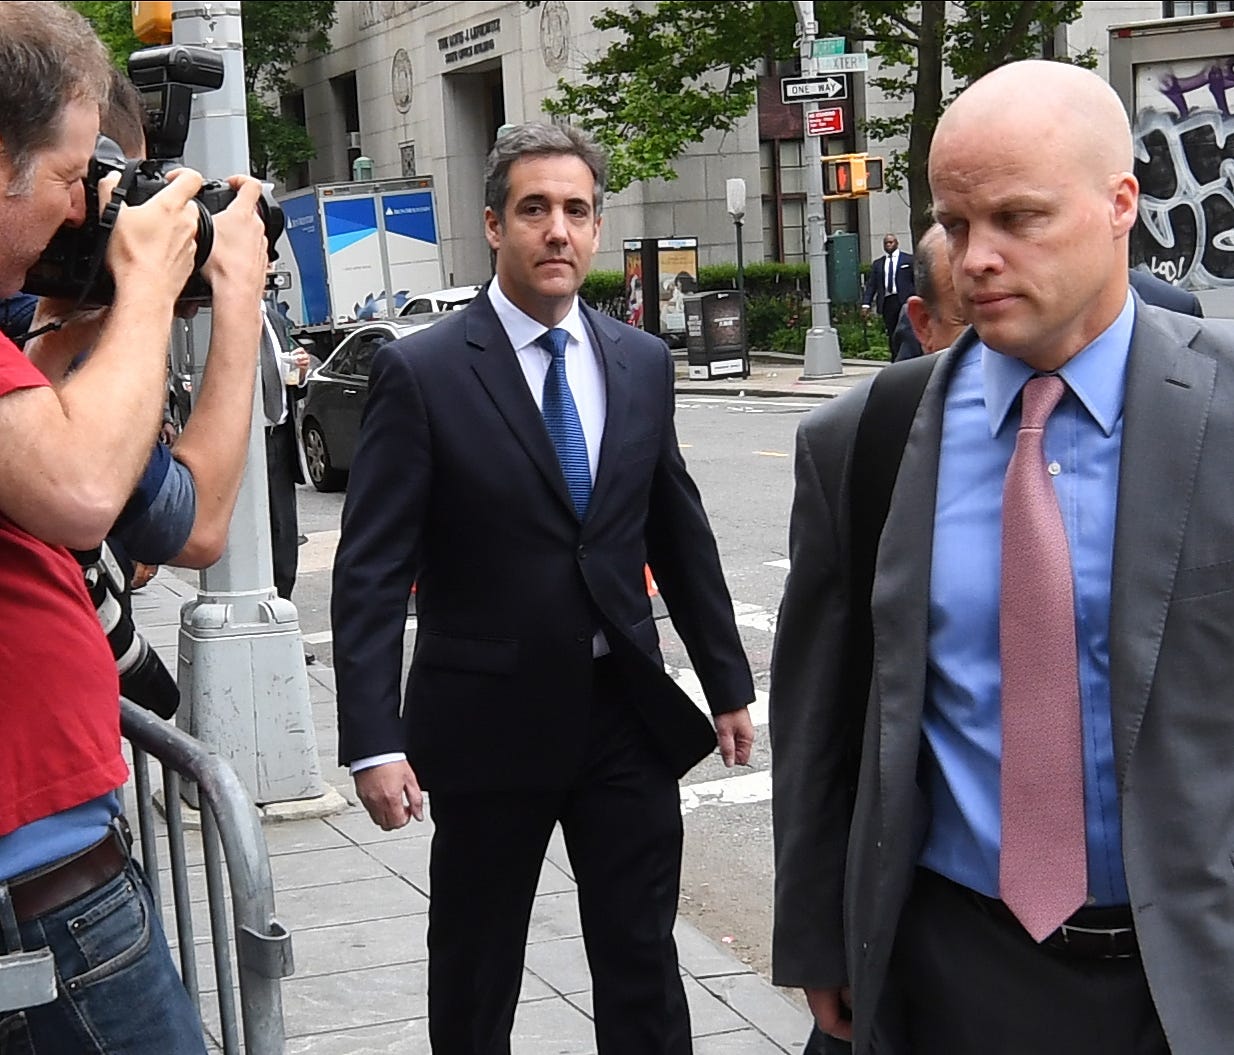 Michael Cohen, the longtime lawyer of President Donald Trump, arrives at the U.S. Courthouse in New York to attend a hearing to limit prosecutors' review of documents seized from his home and office.